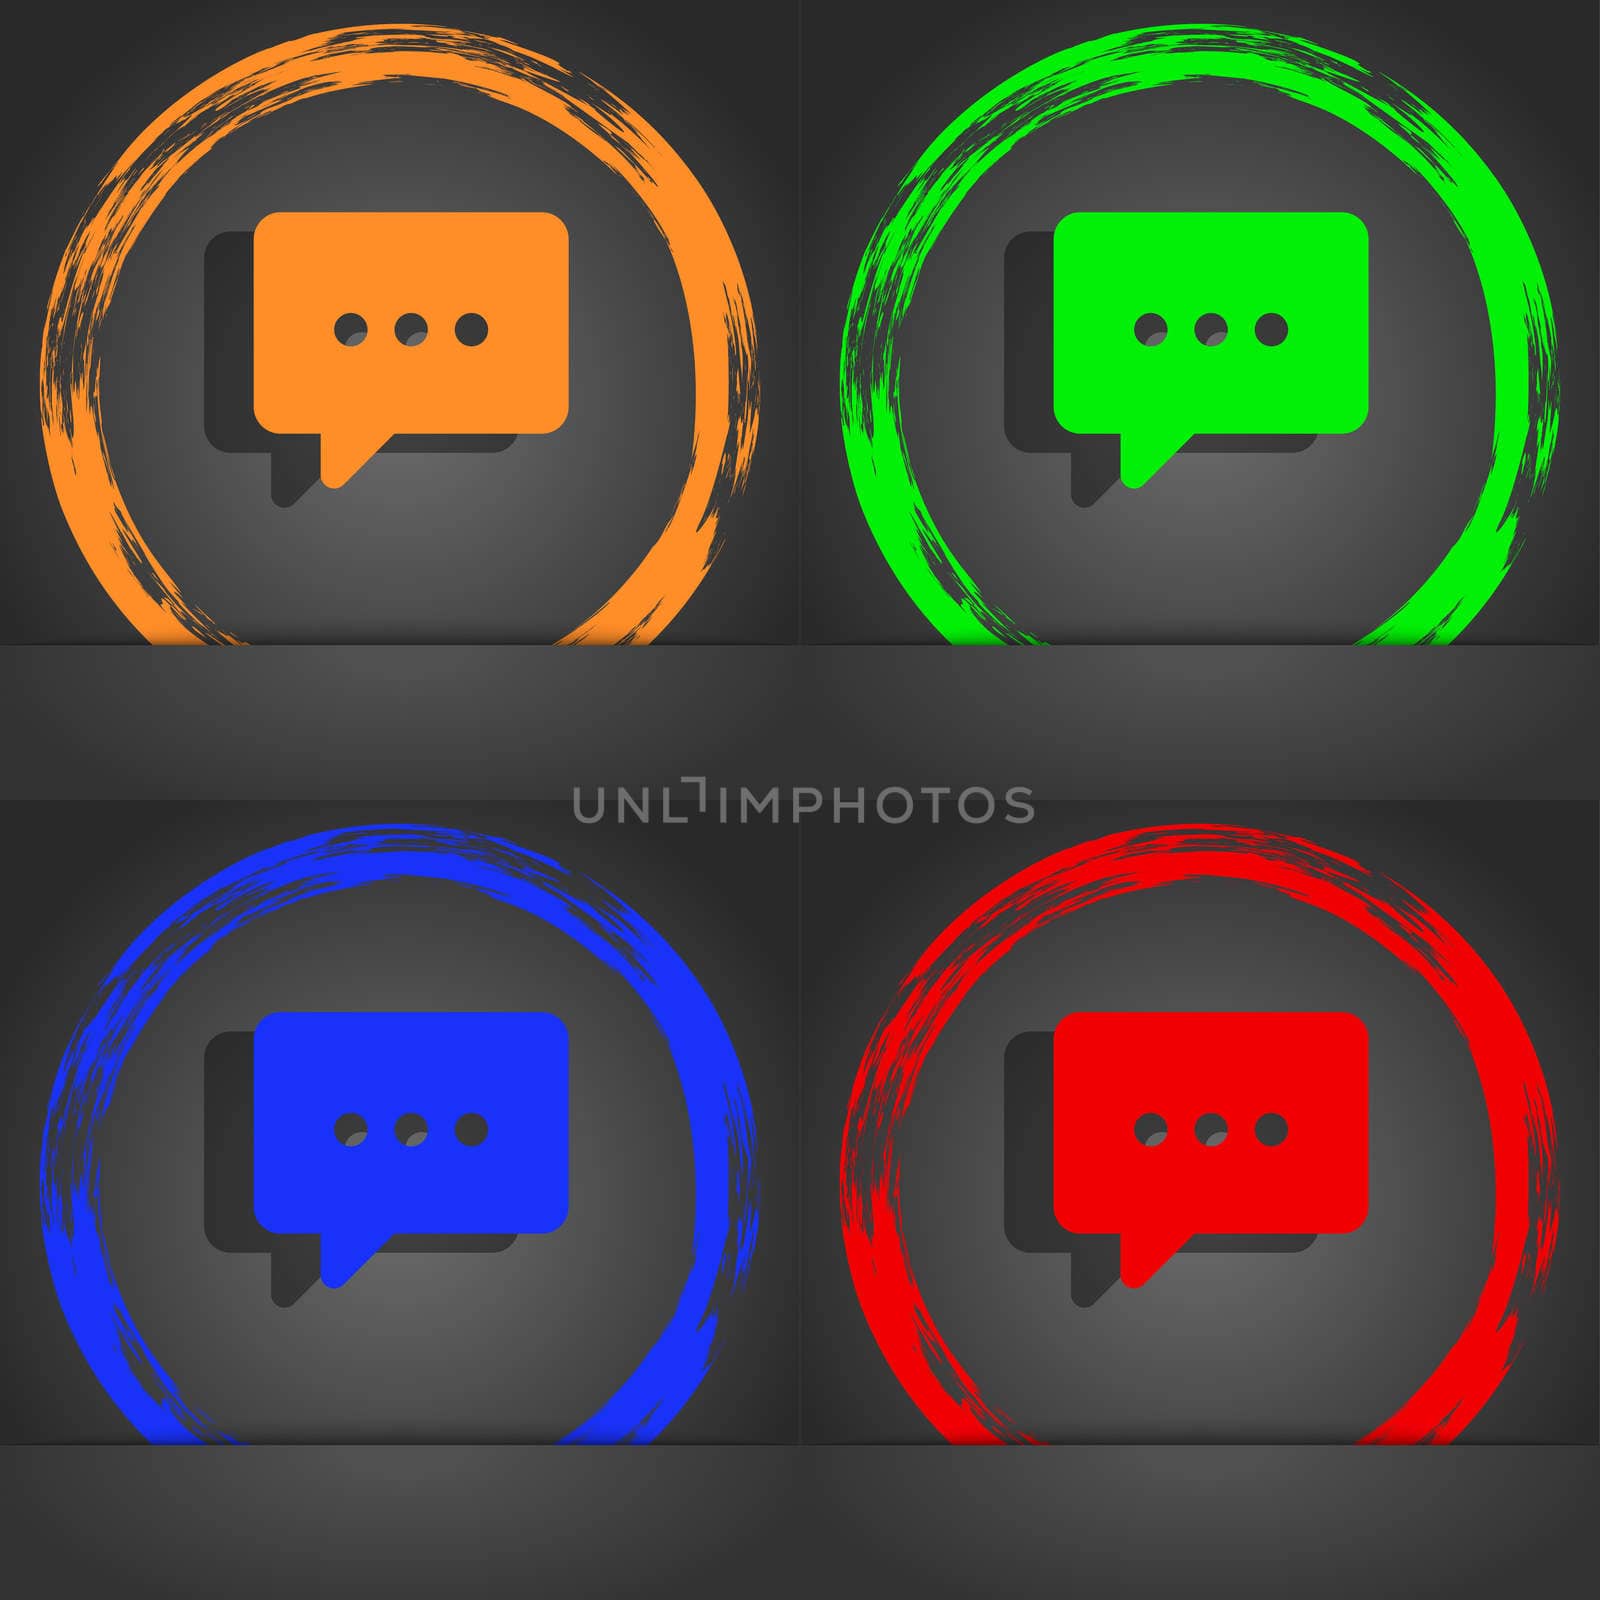 Cloud of thoughts icon symbol. Fashionable modern style. In the orange, green, blue, green design. illustration